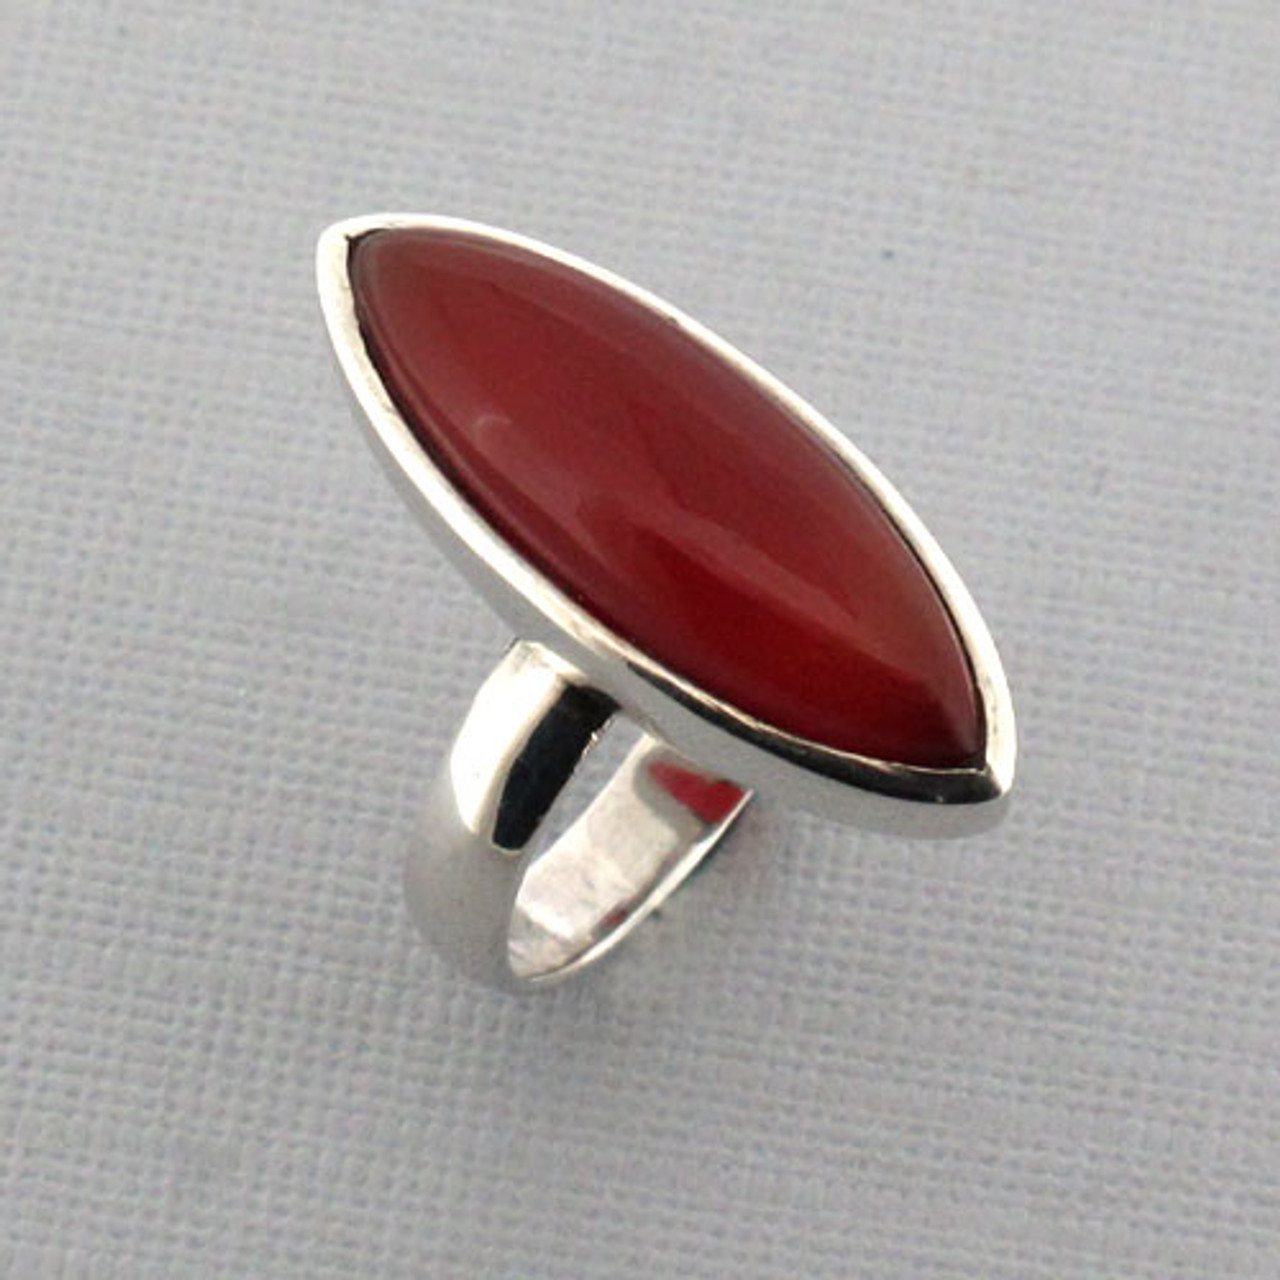 Solid 925 Sterling Silver Ring Natural Copper Carnelian Stylish Jewelry Size 5.5 